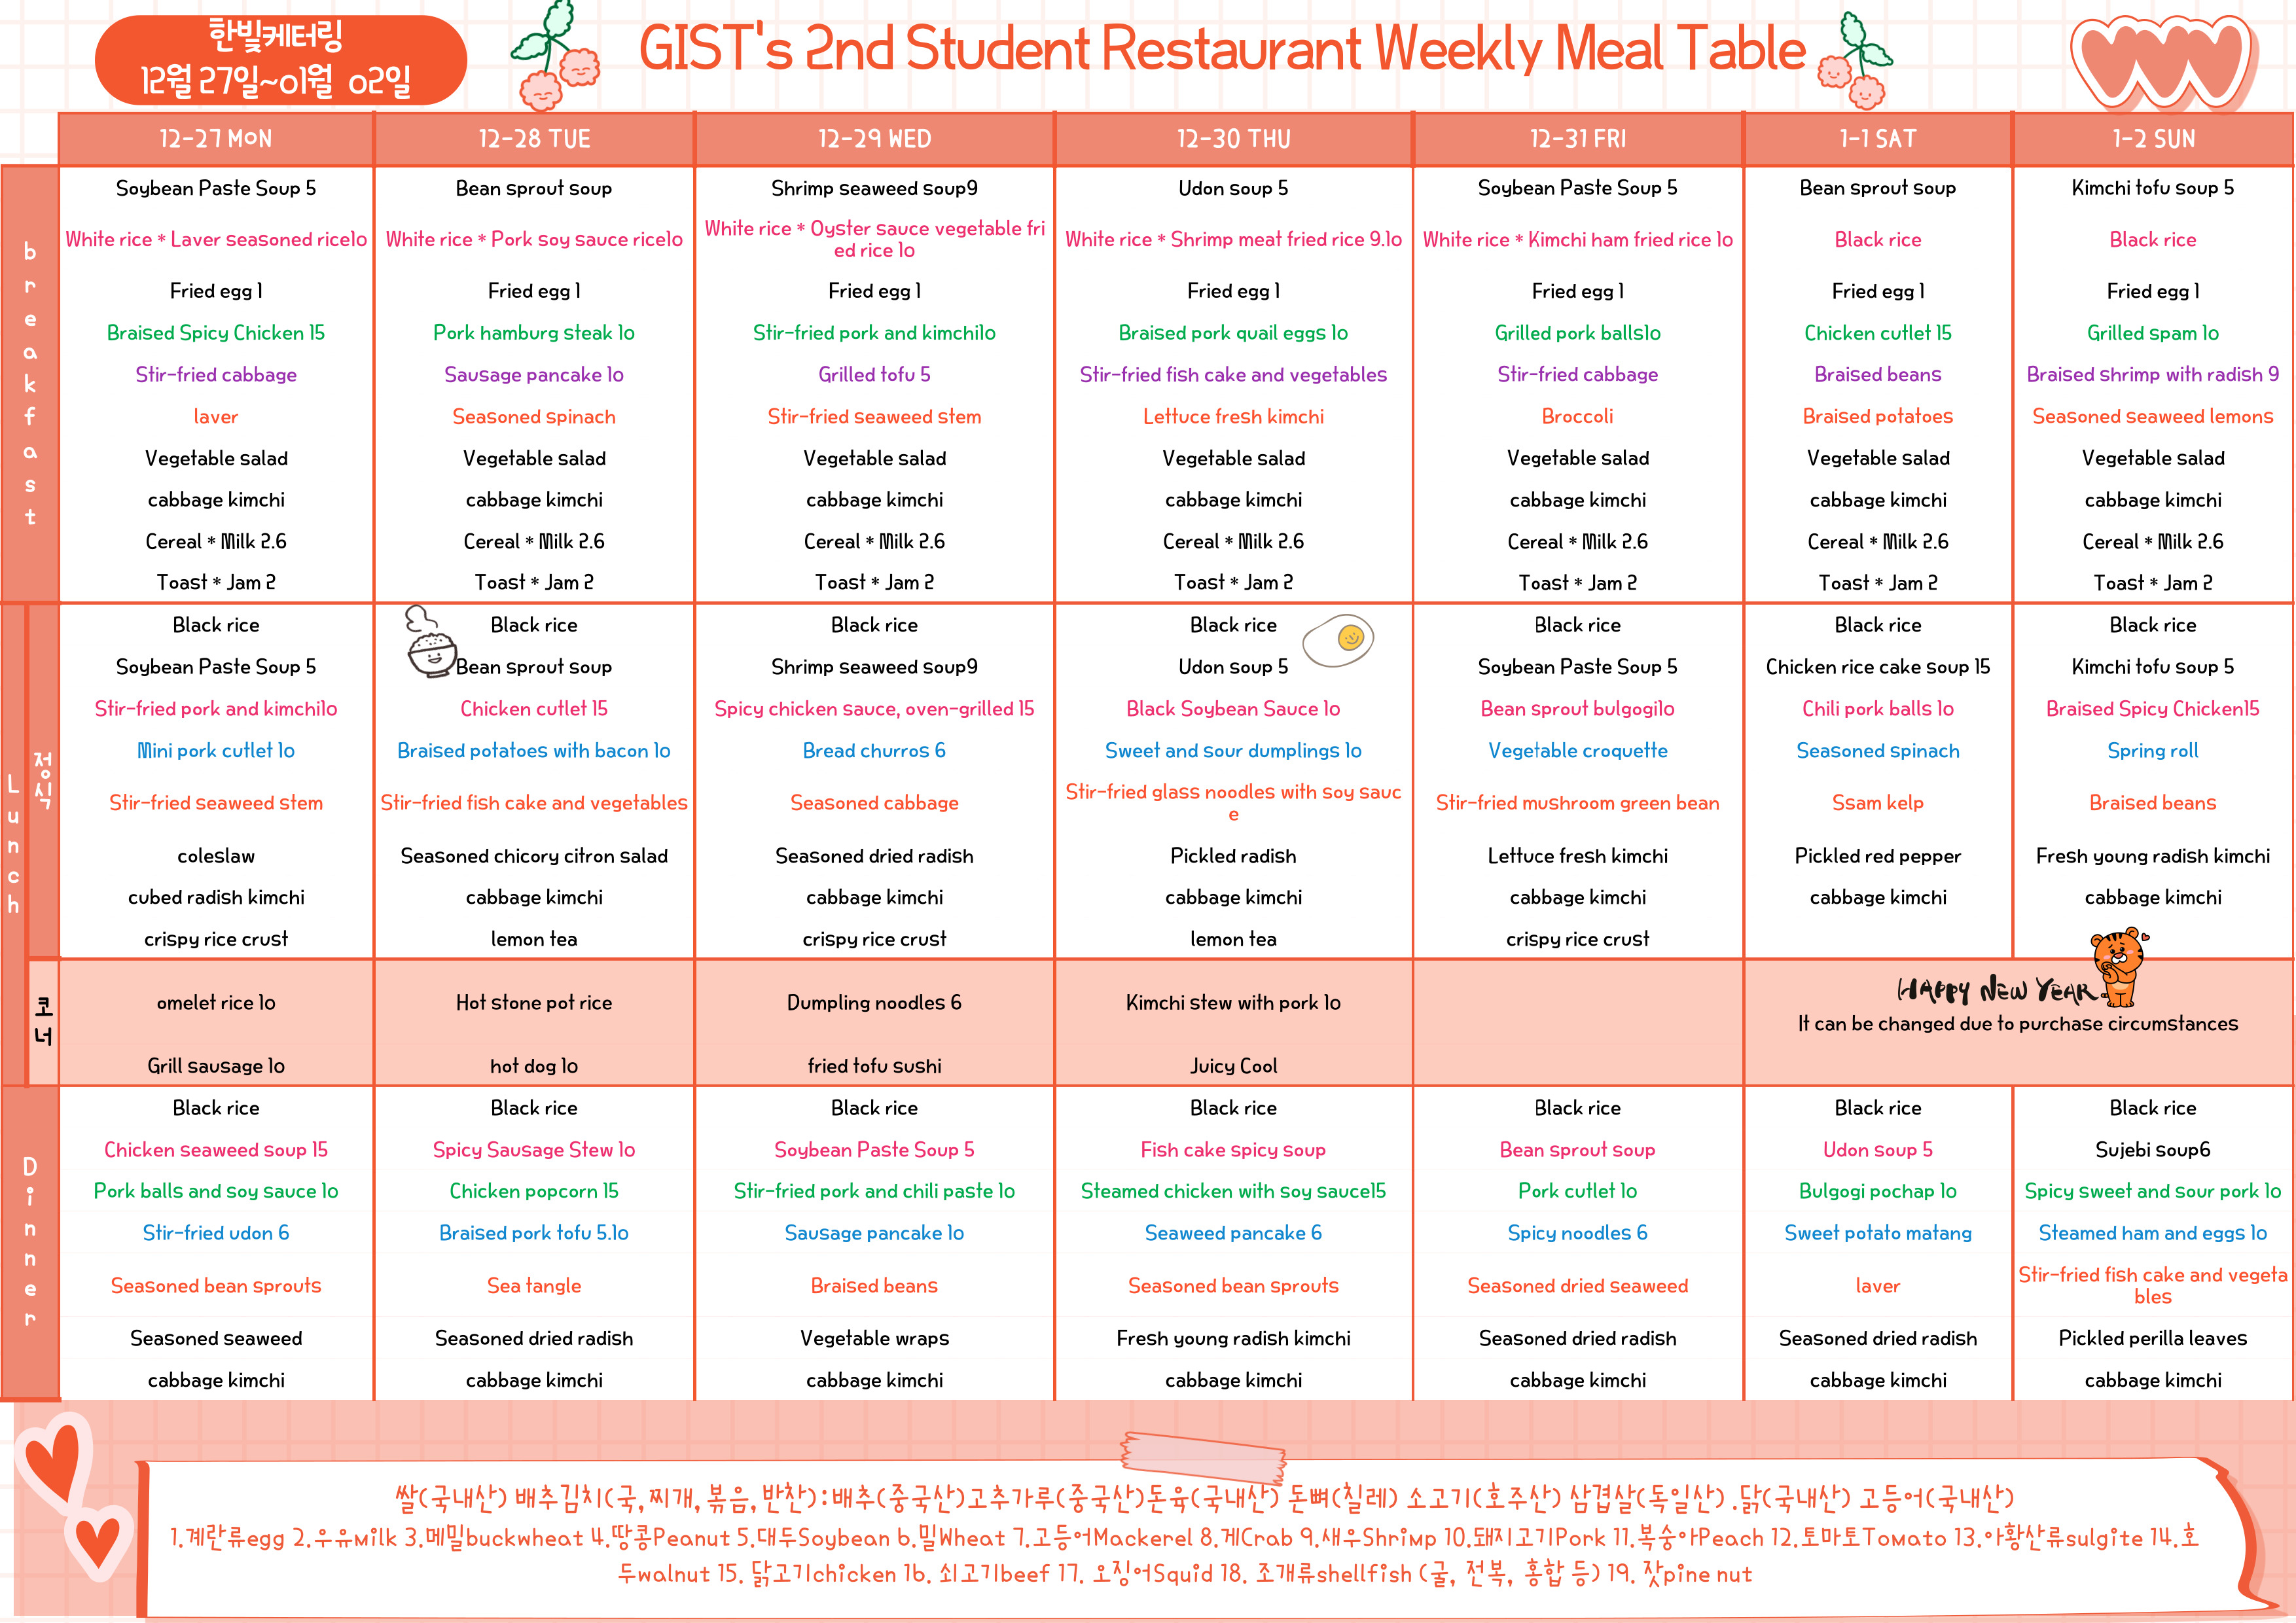 The 2nd Student Restaurant Weekly Meal Table (2021.12.27-2021.01.02) 이미지